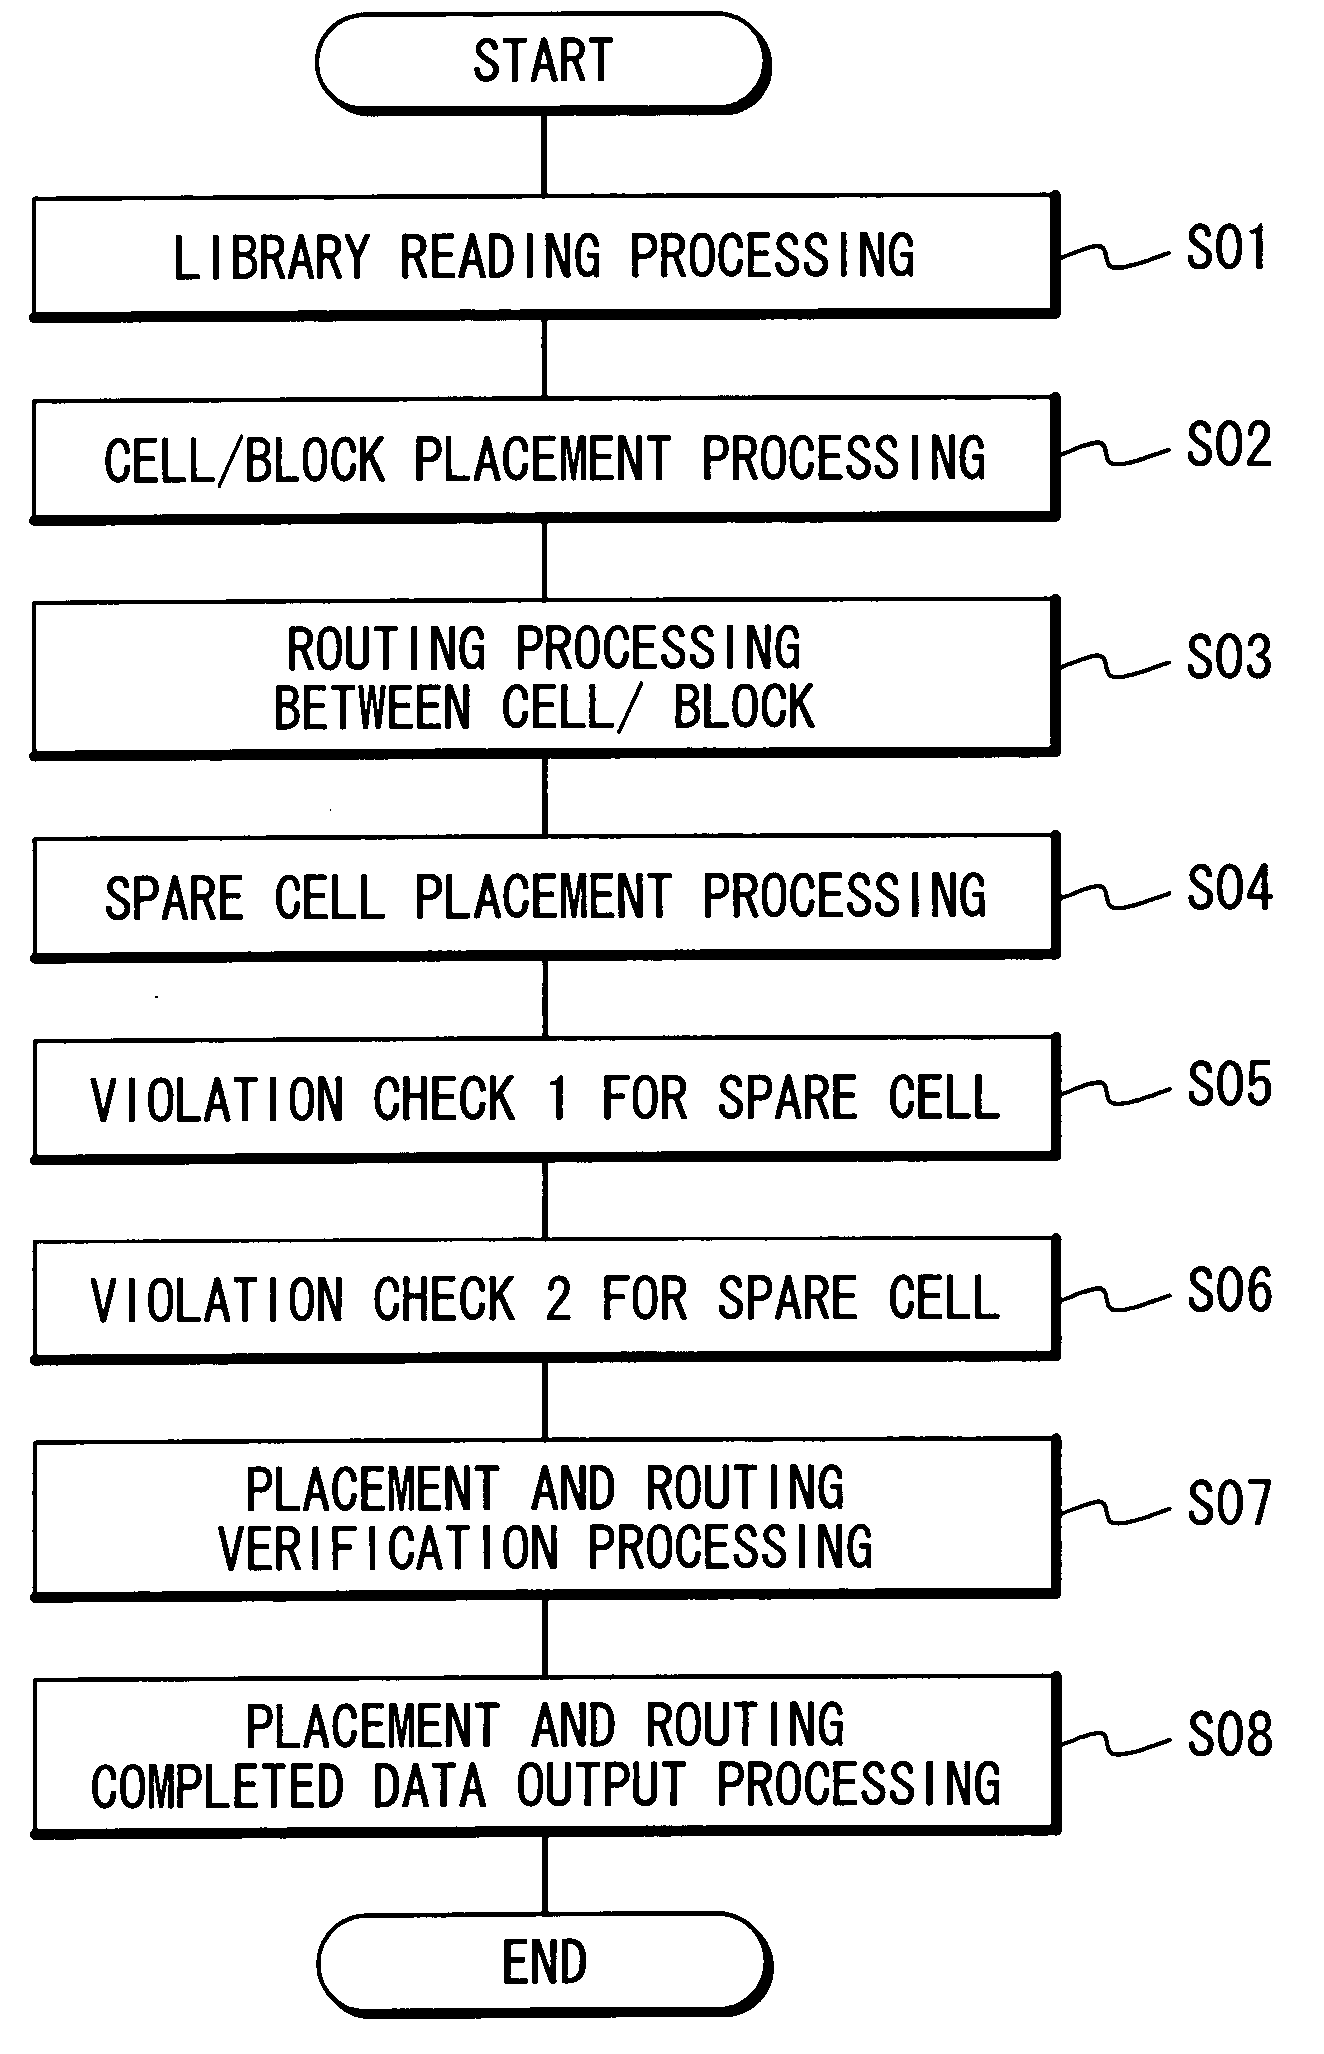 Automatic placement and routing device, method for placement and routing of semiconductor device, semiconductor device and manufacturing method of the same